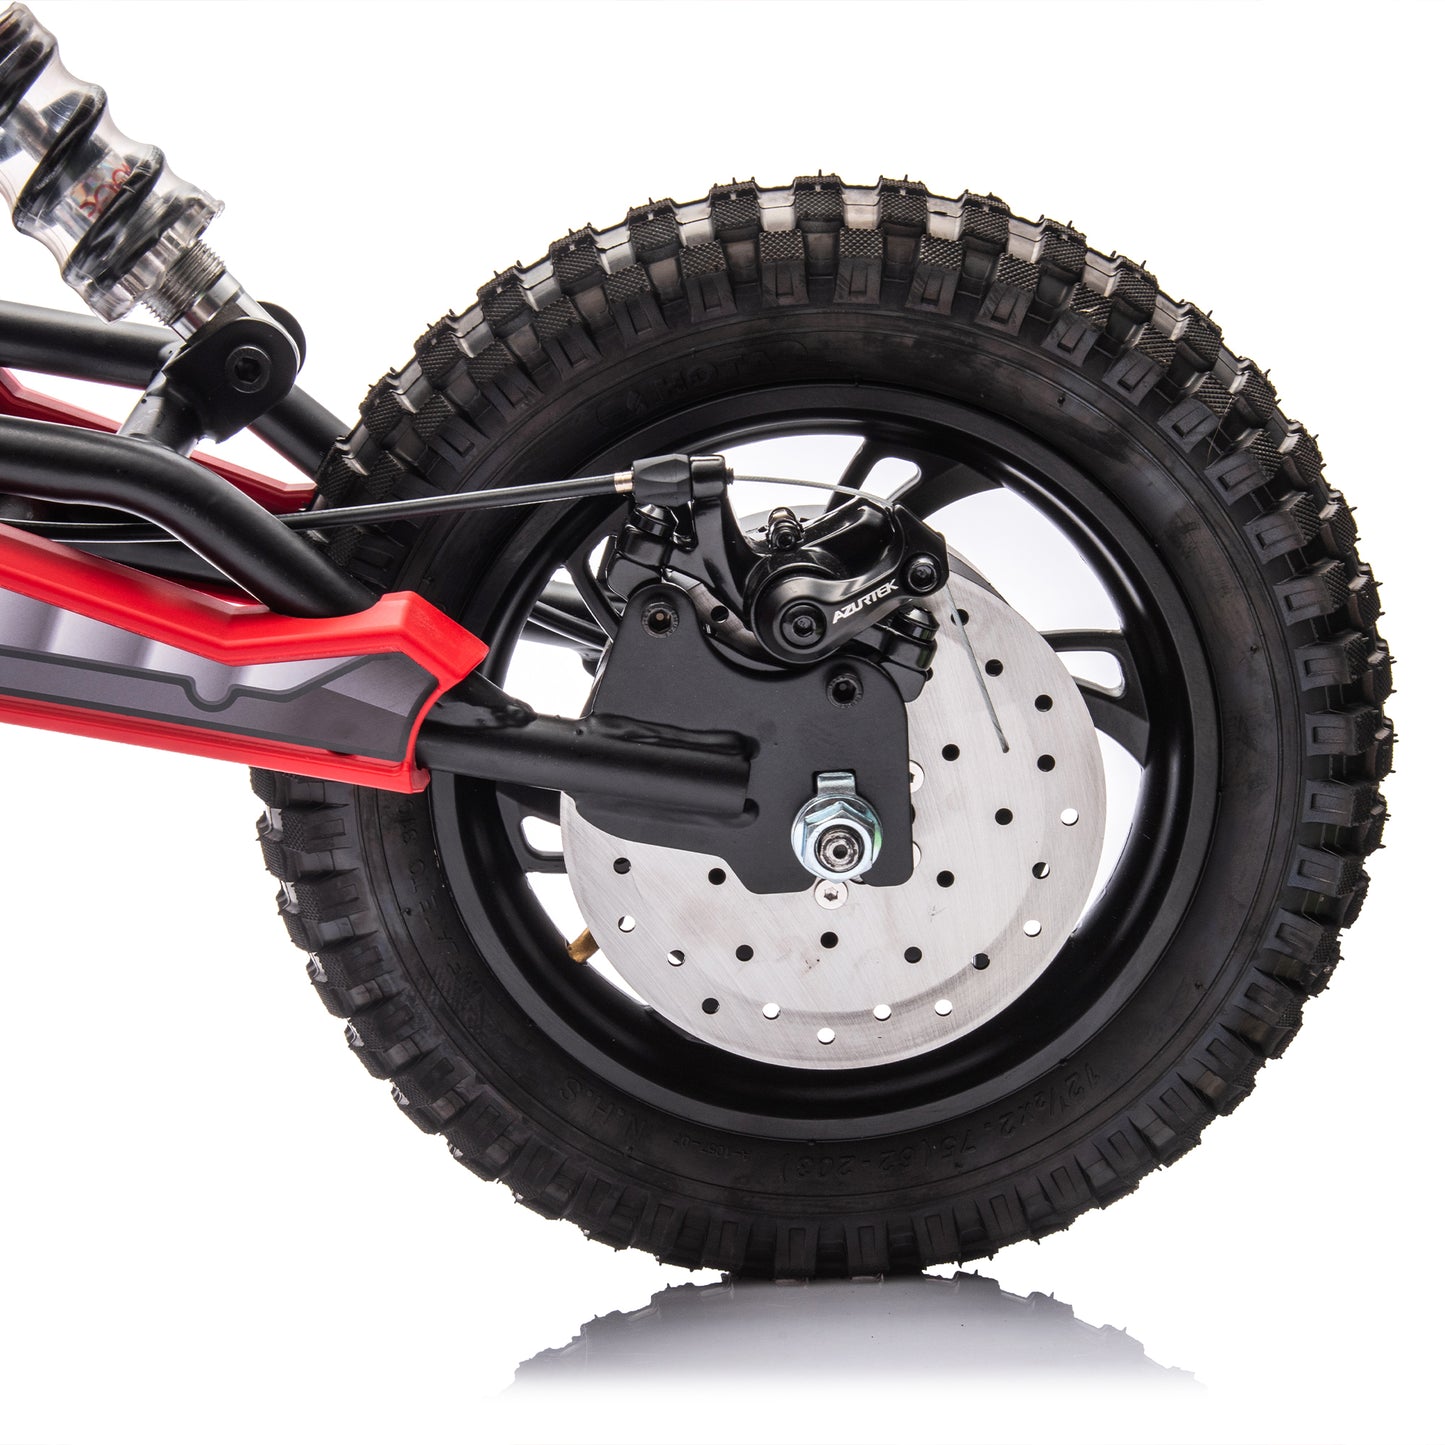 36V Electric mini dirt motorcycle for kids,350w xxxl motorcycle,Stepless variable speed drive,Disc brake,No chain,Steady acceleration,horn, power display,rate display,176 pounds for 50m or more,age14+